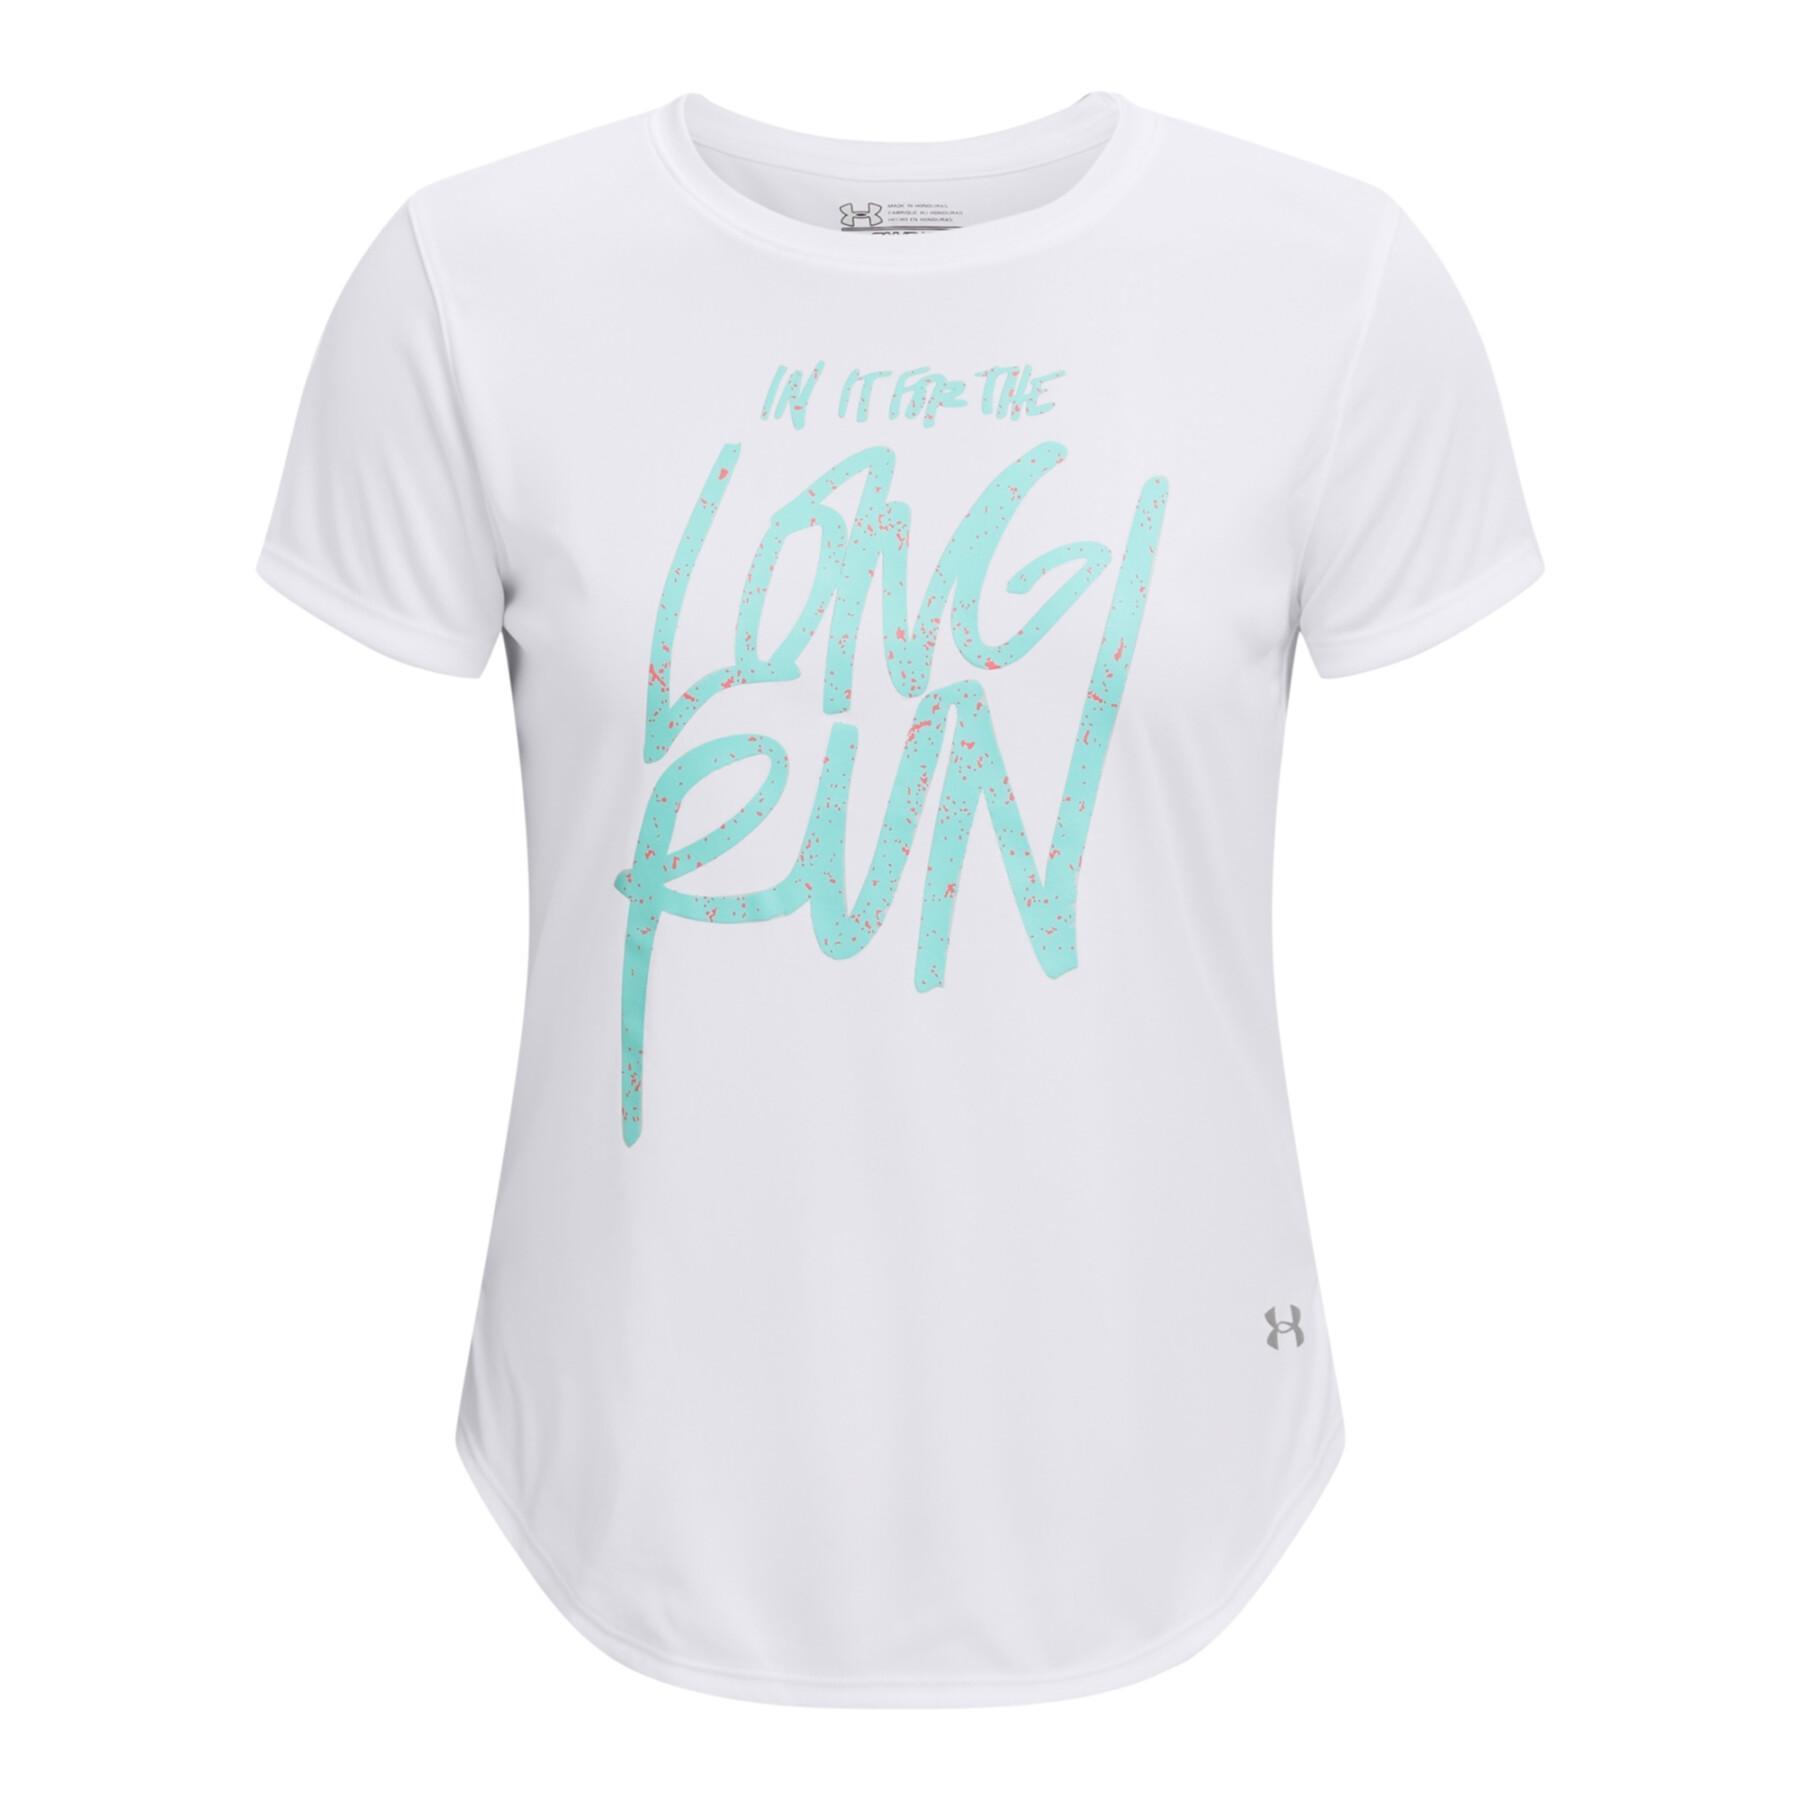 Maillot femme Under Armour Long Run Graphic